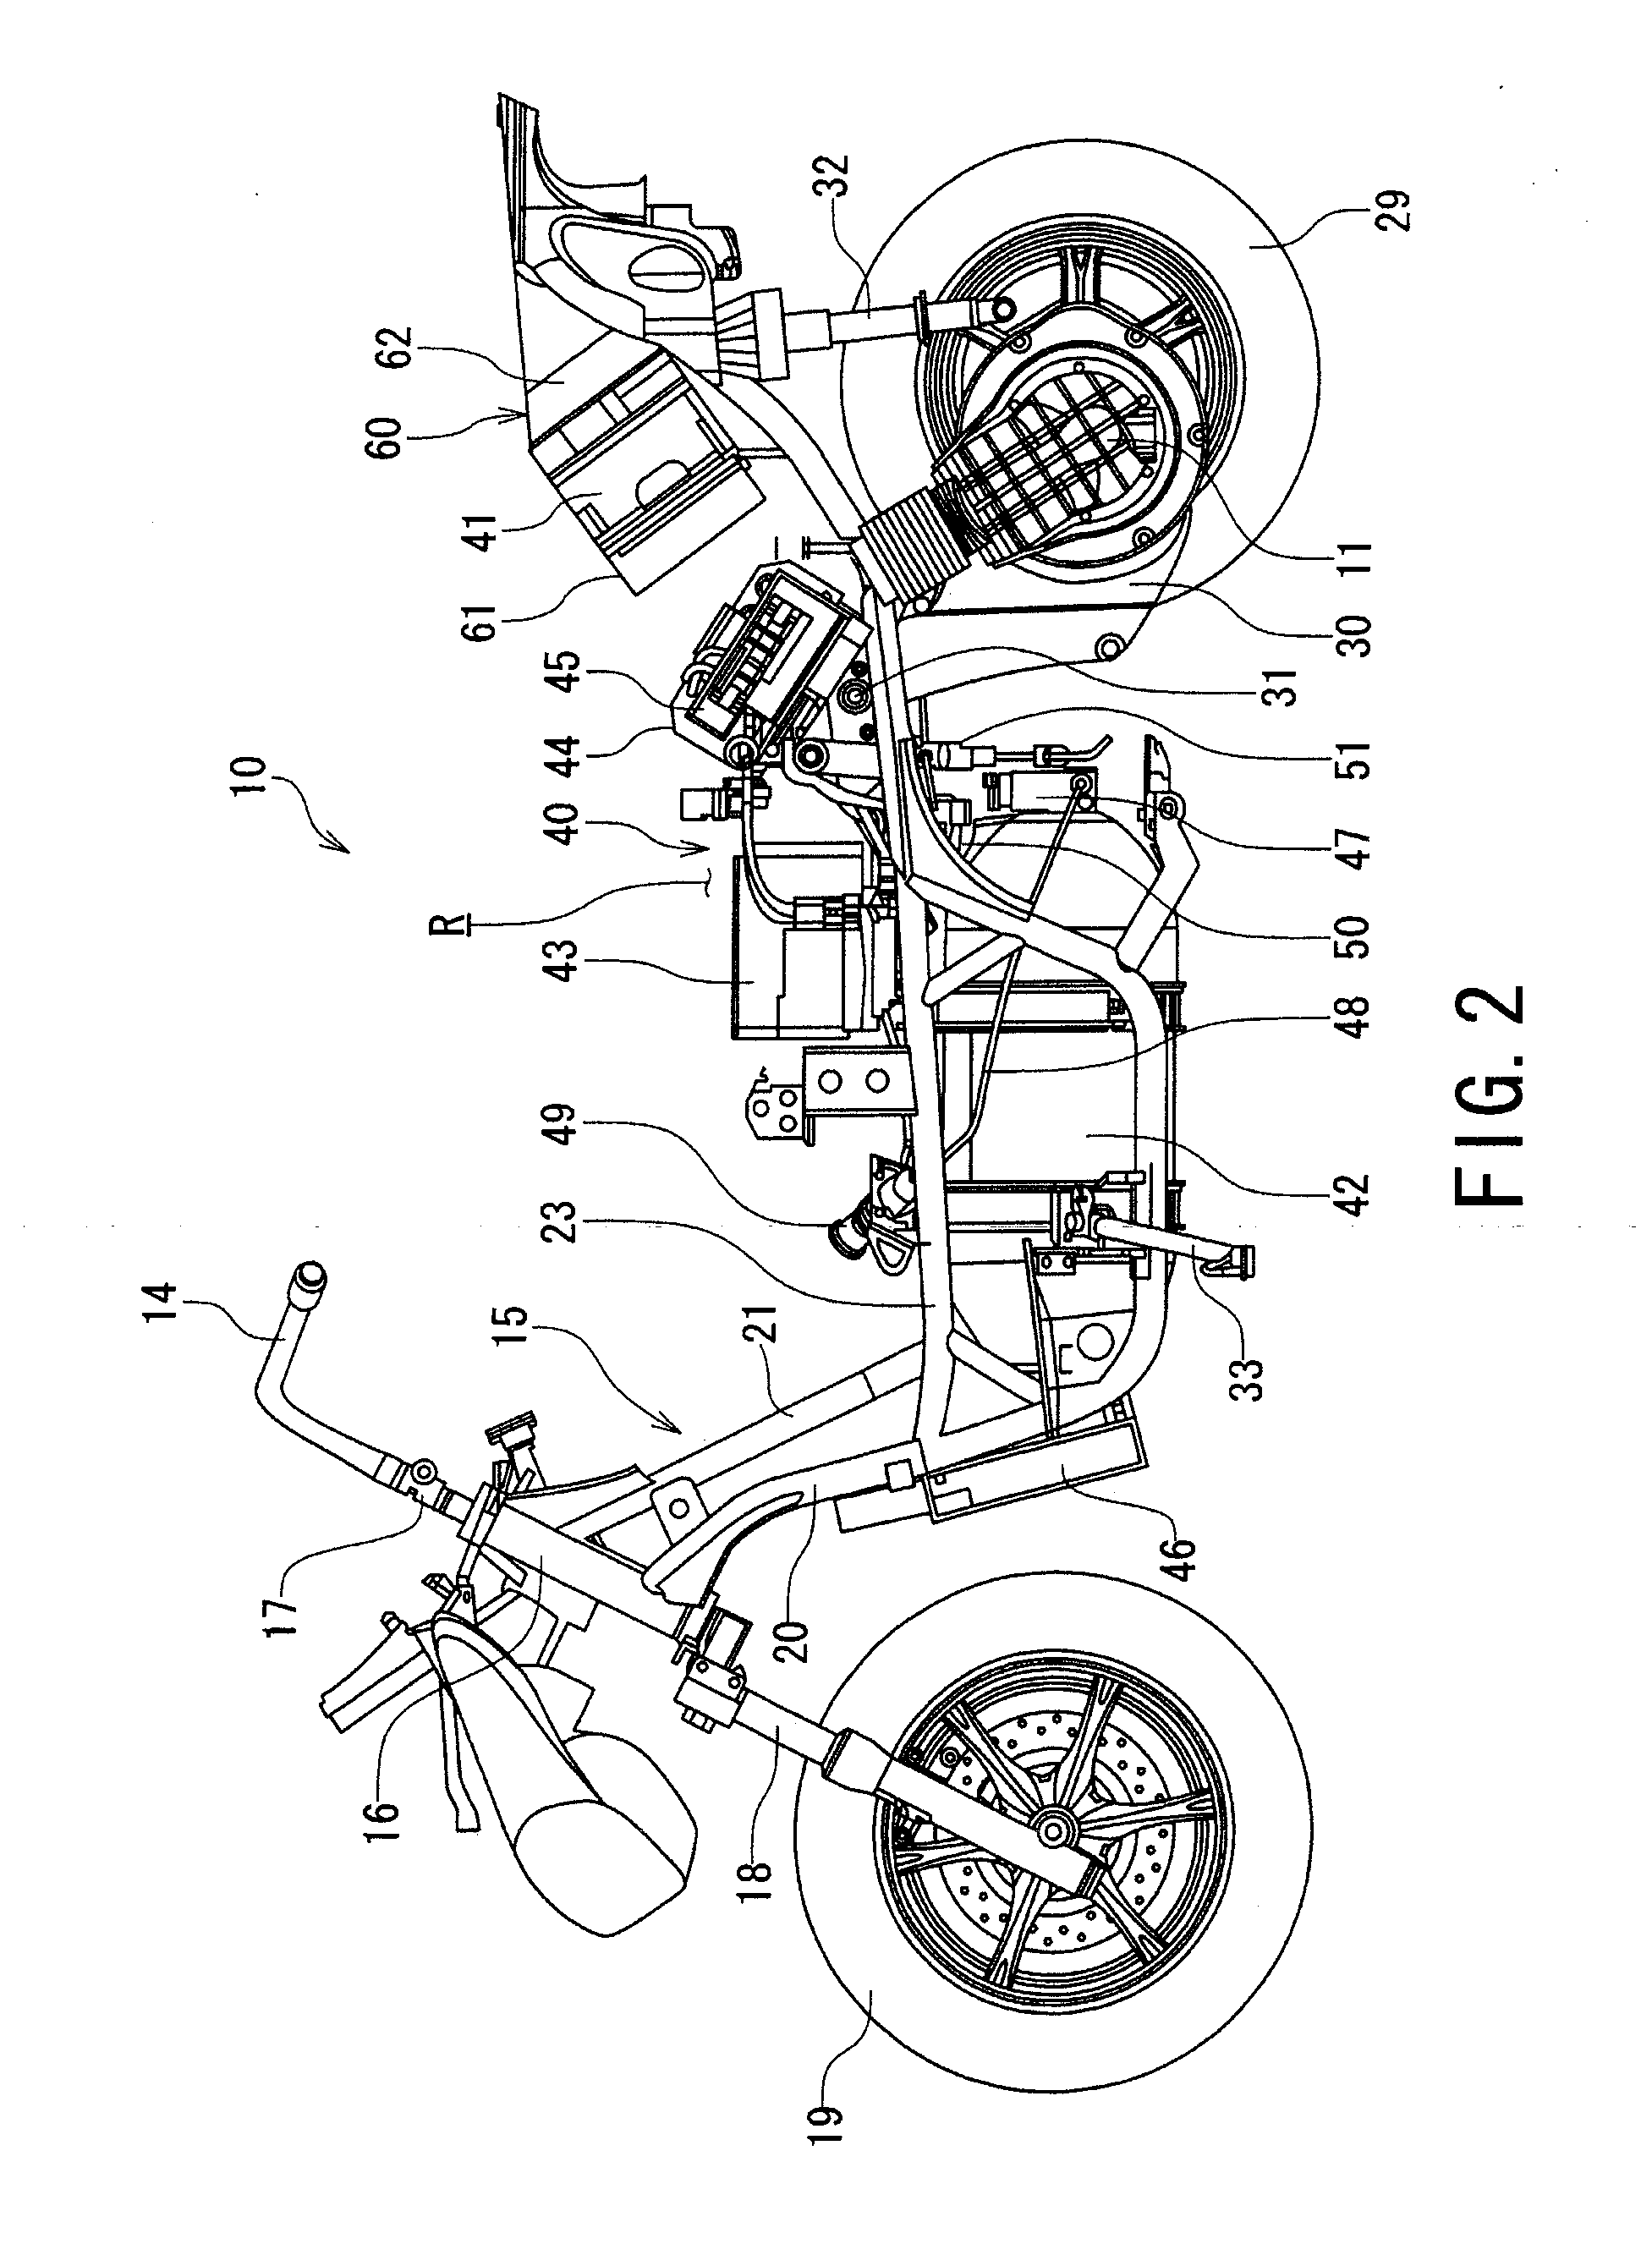 Air supply and exhaust structure for fuel cell